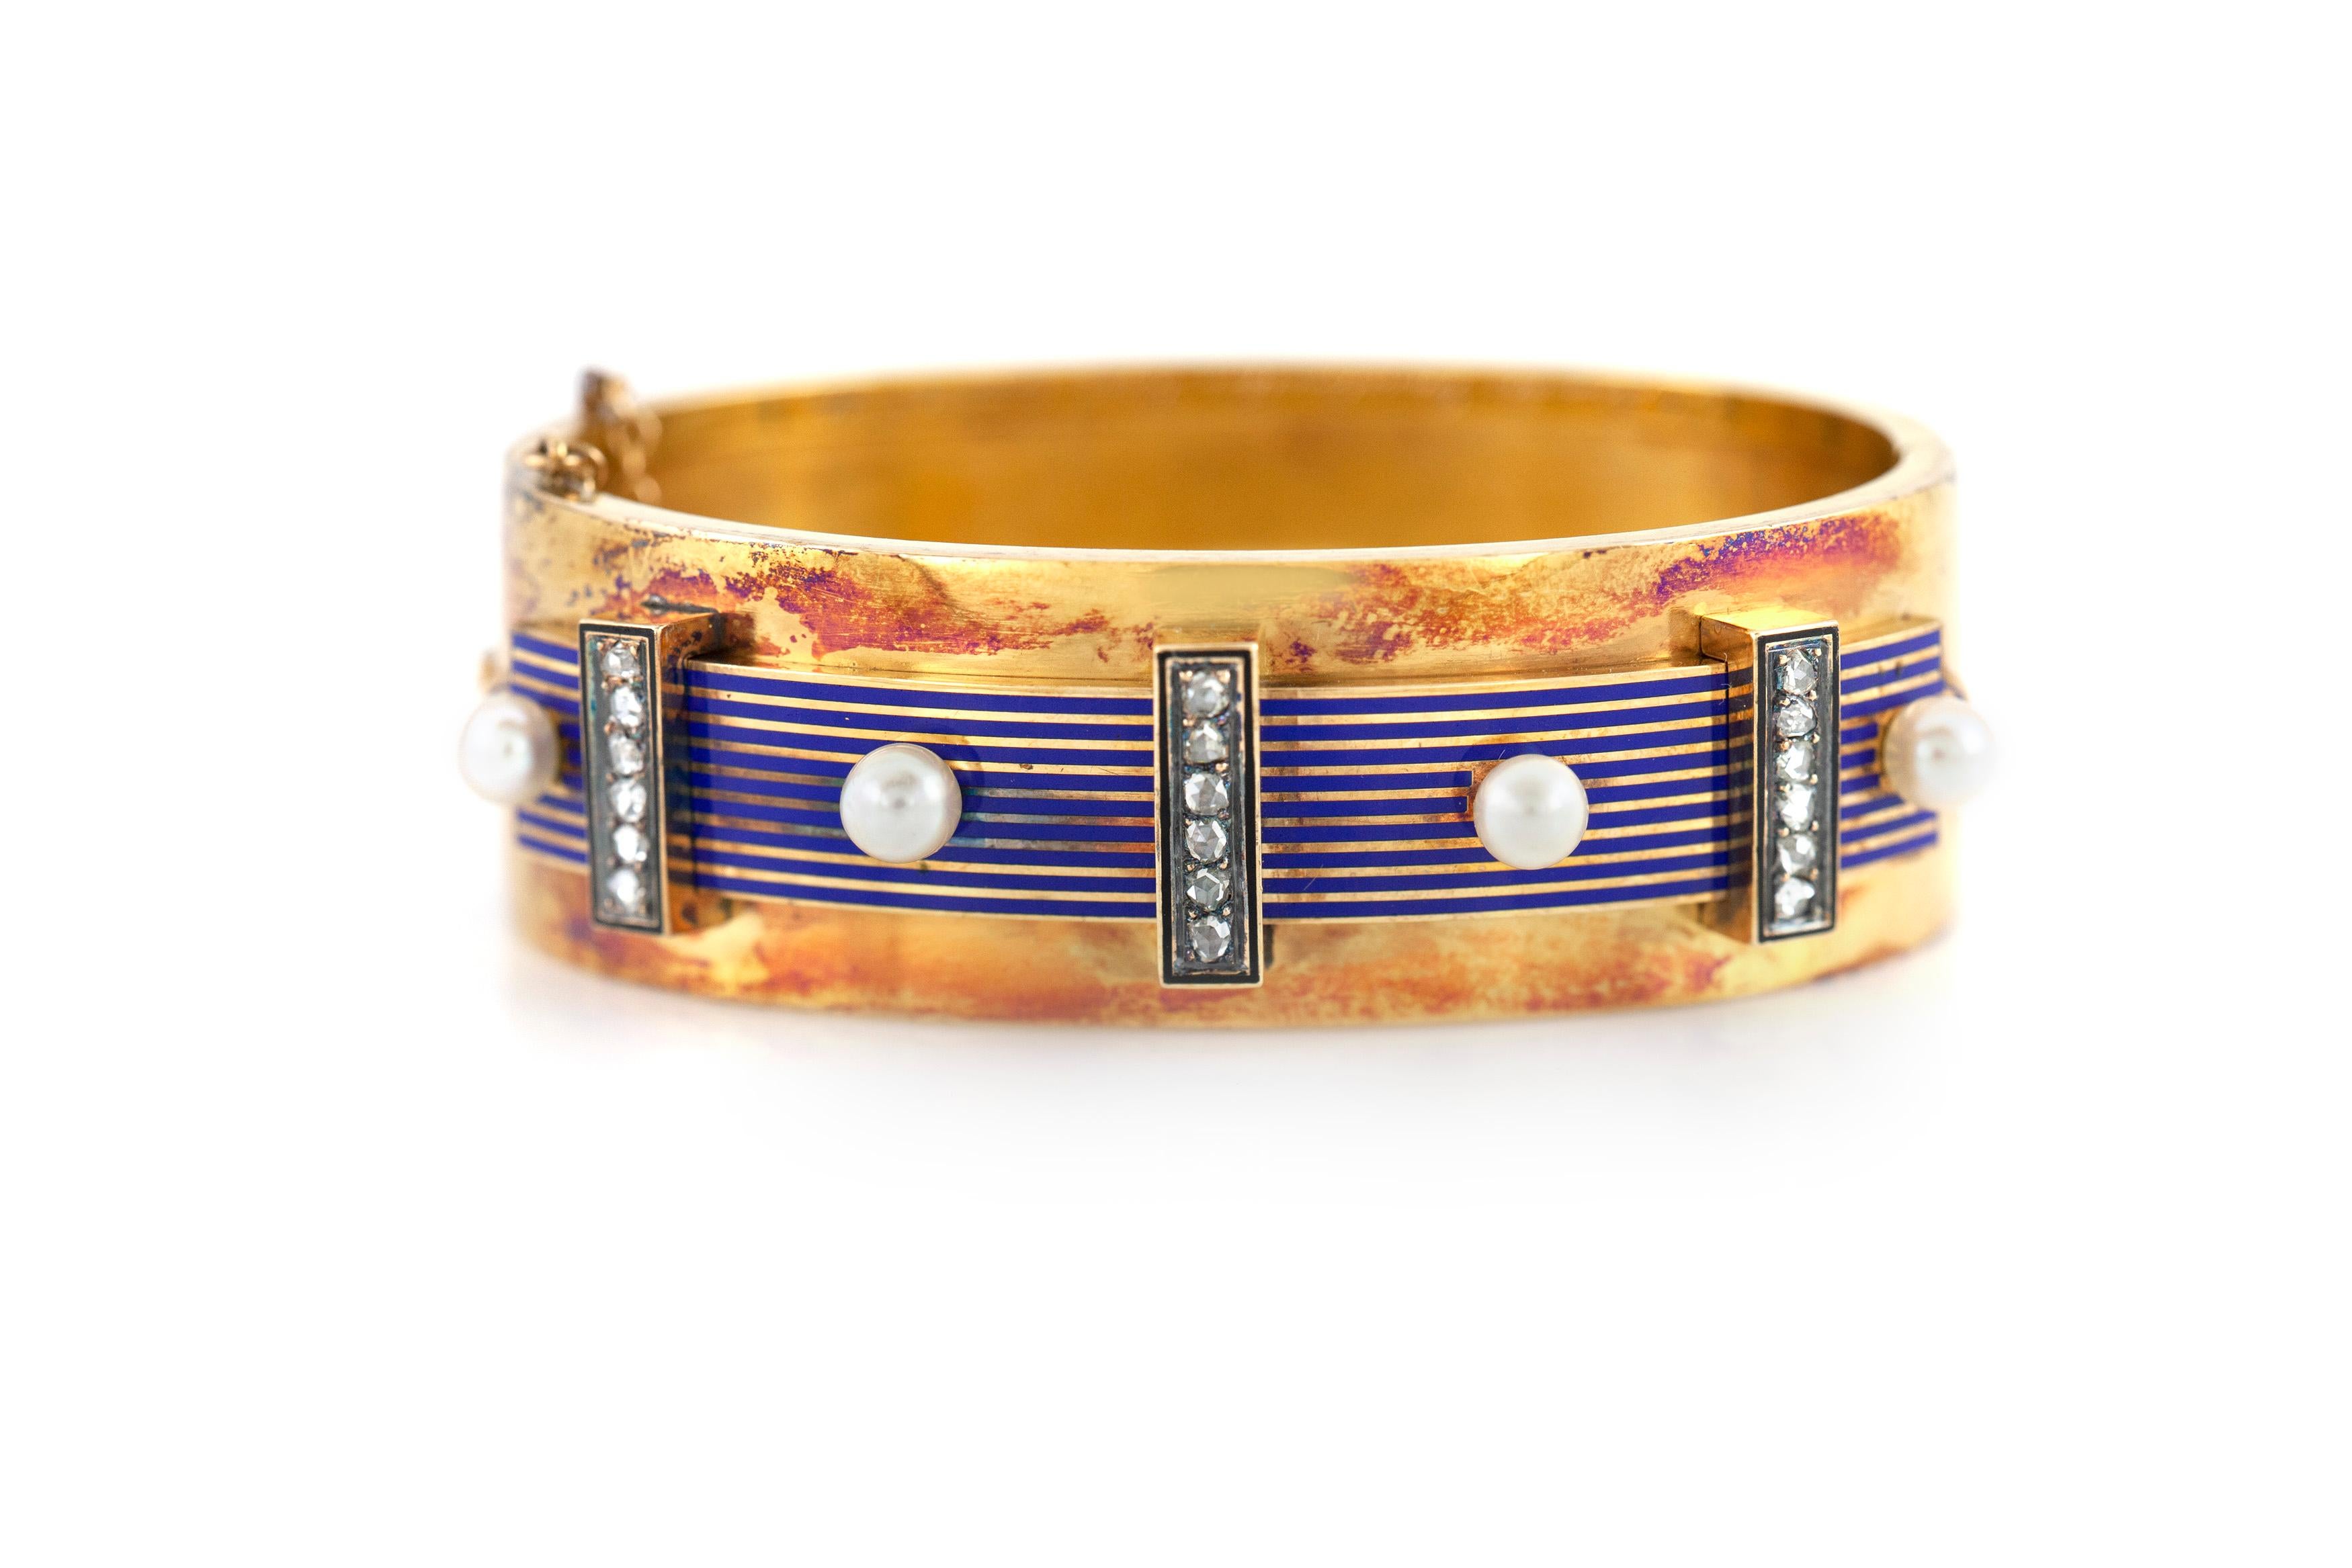 The bangle is finely crafted in 18k yellow gold with pearls and diamonds weighing approximately total of 0.36 carat.
